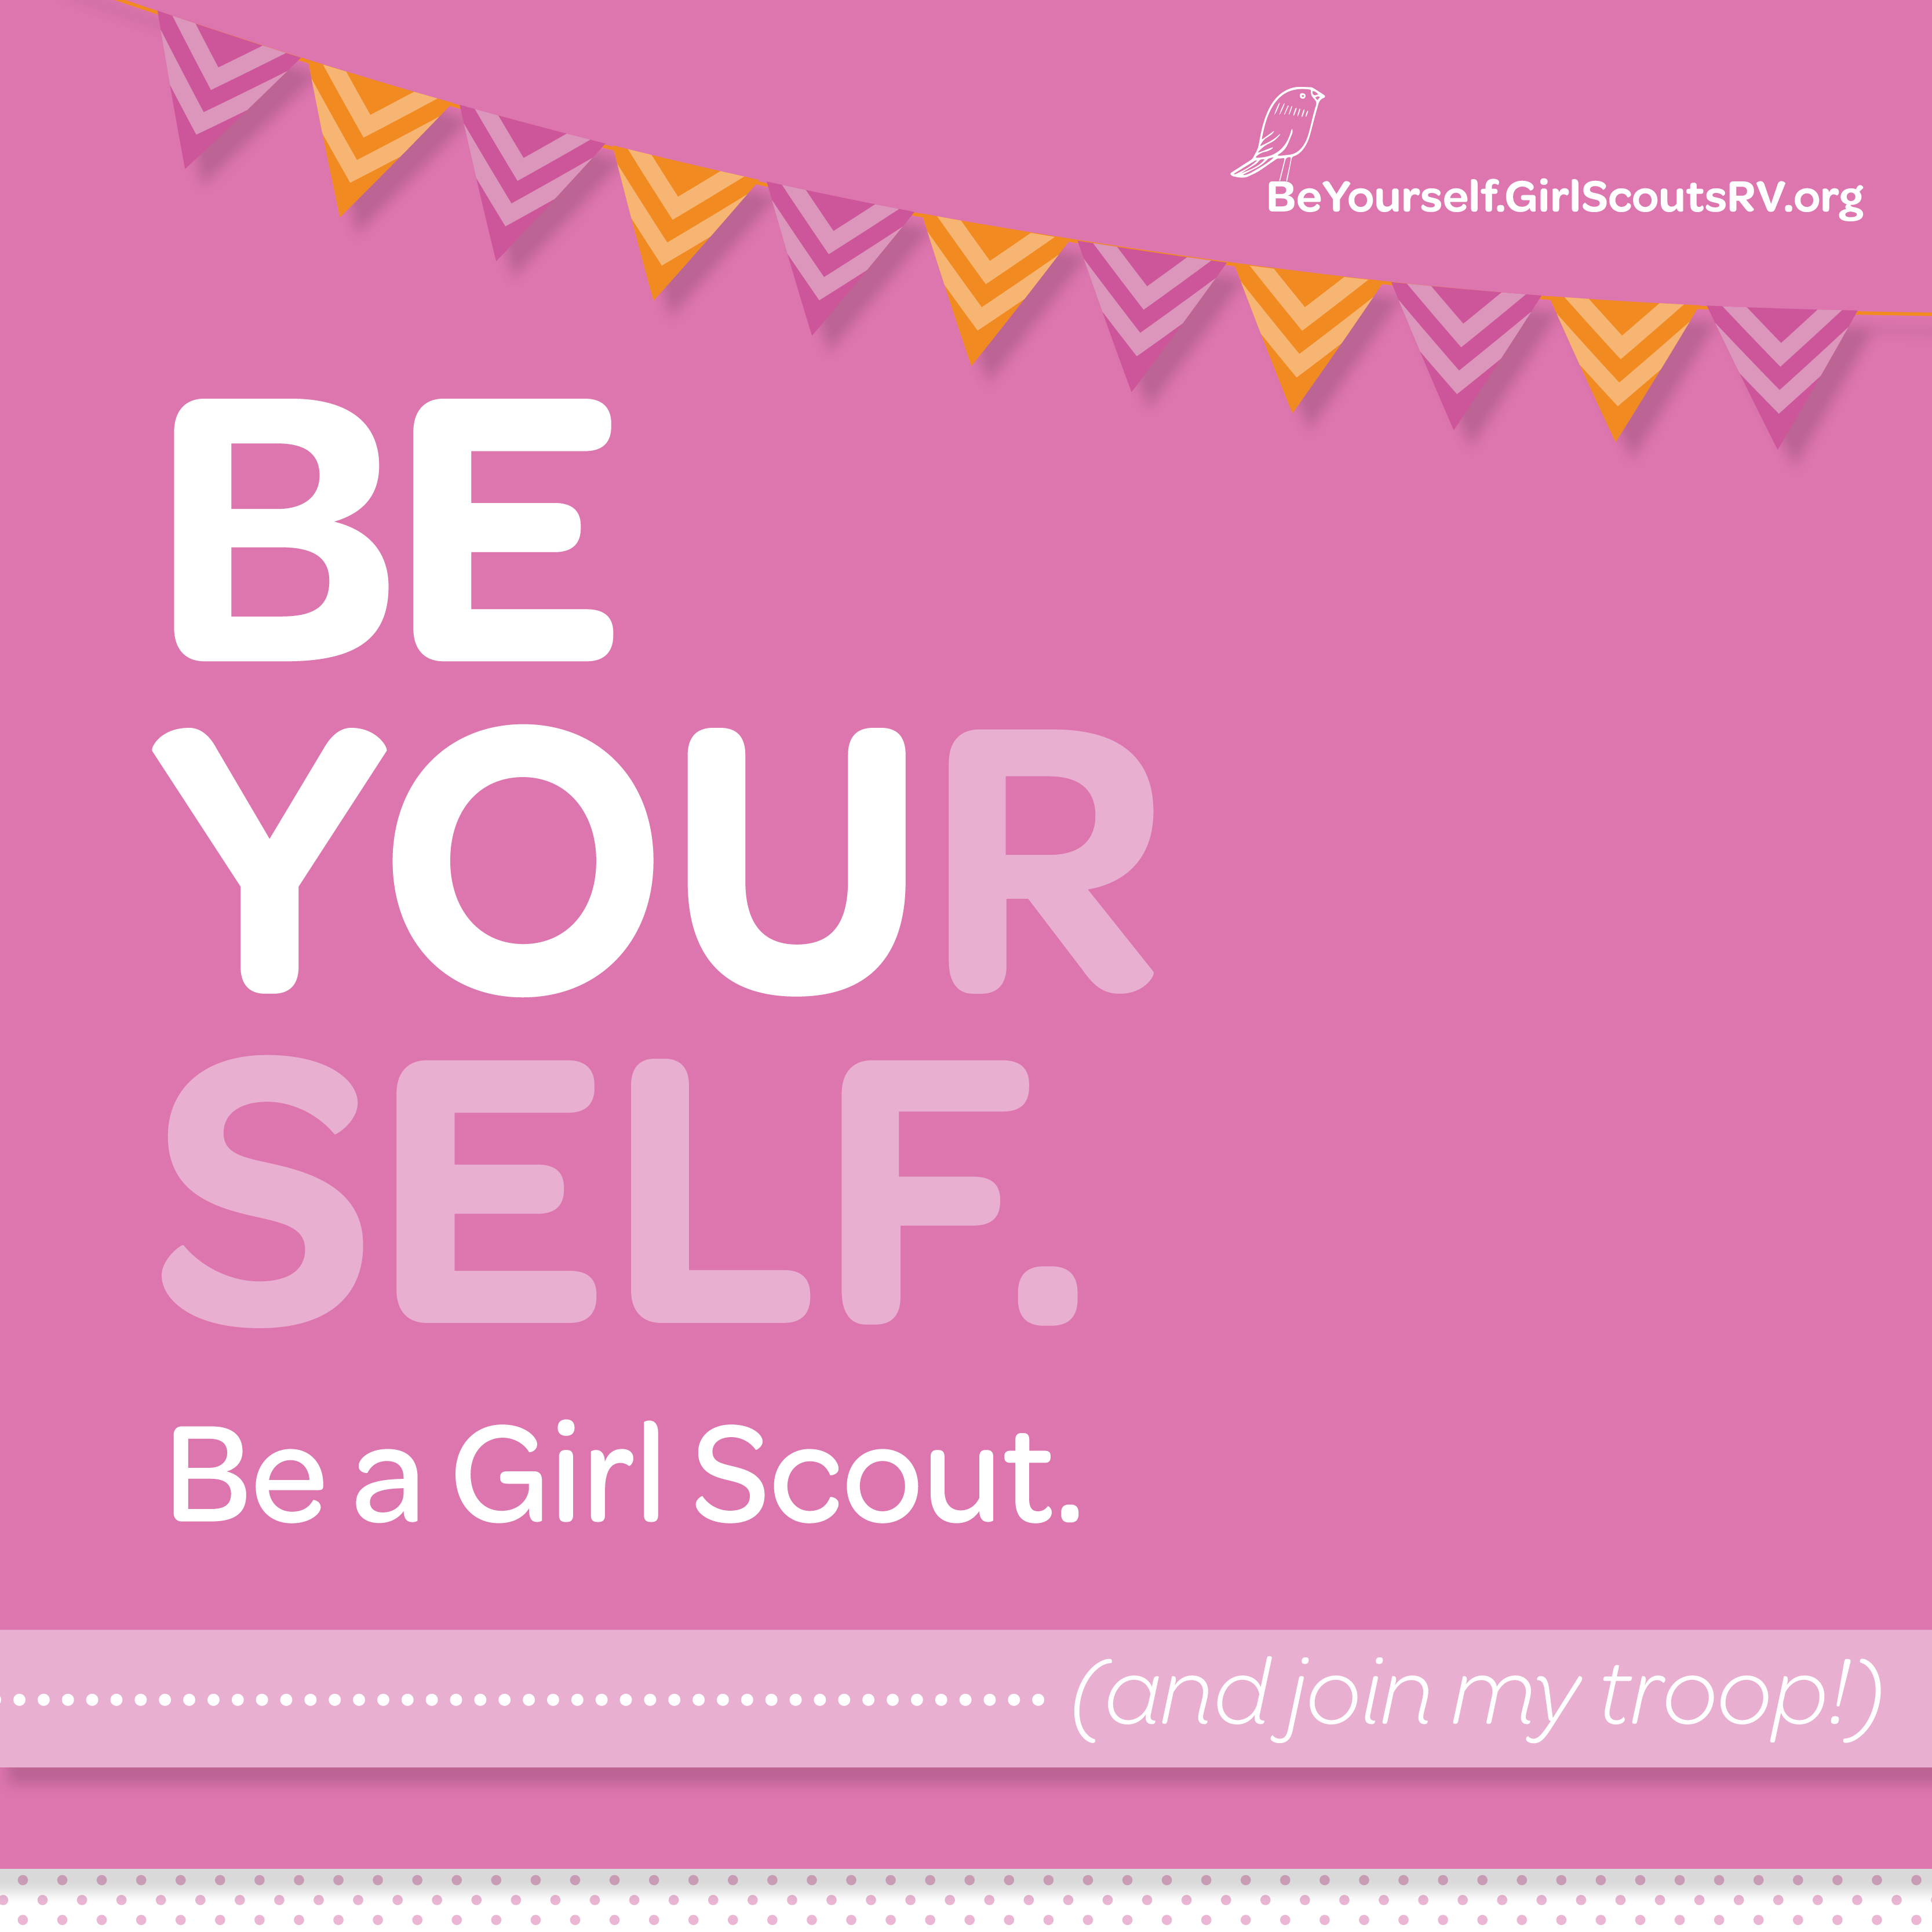 Start a Troop | Be Yourself: Be a Girl Scout